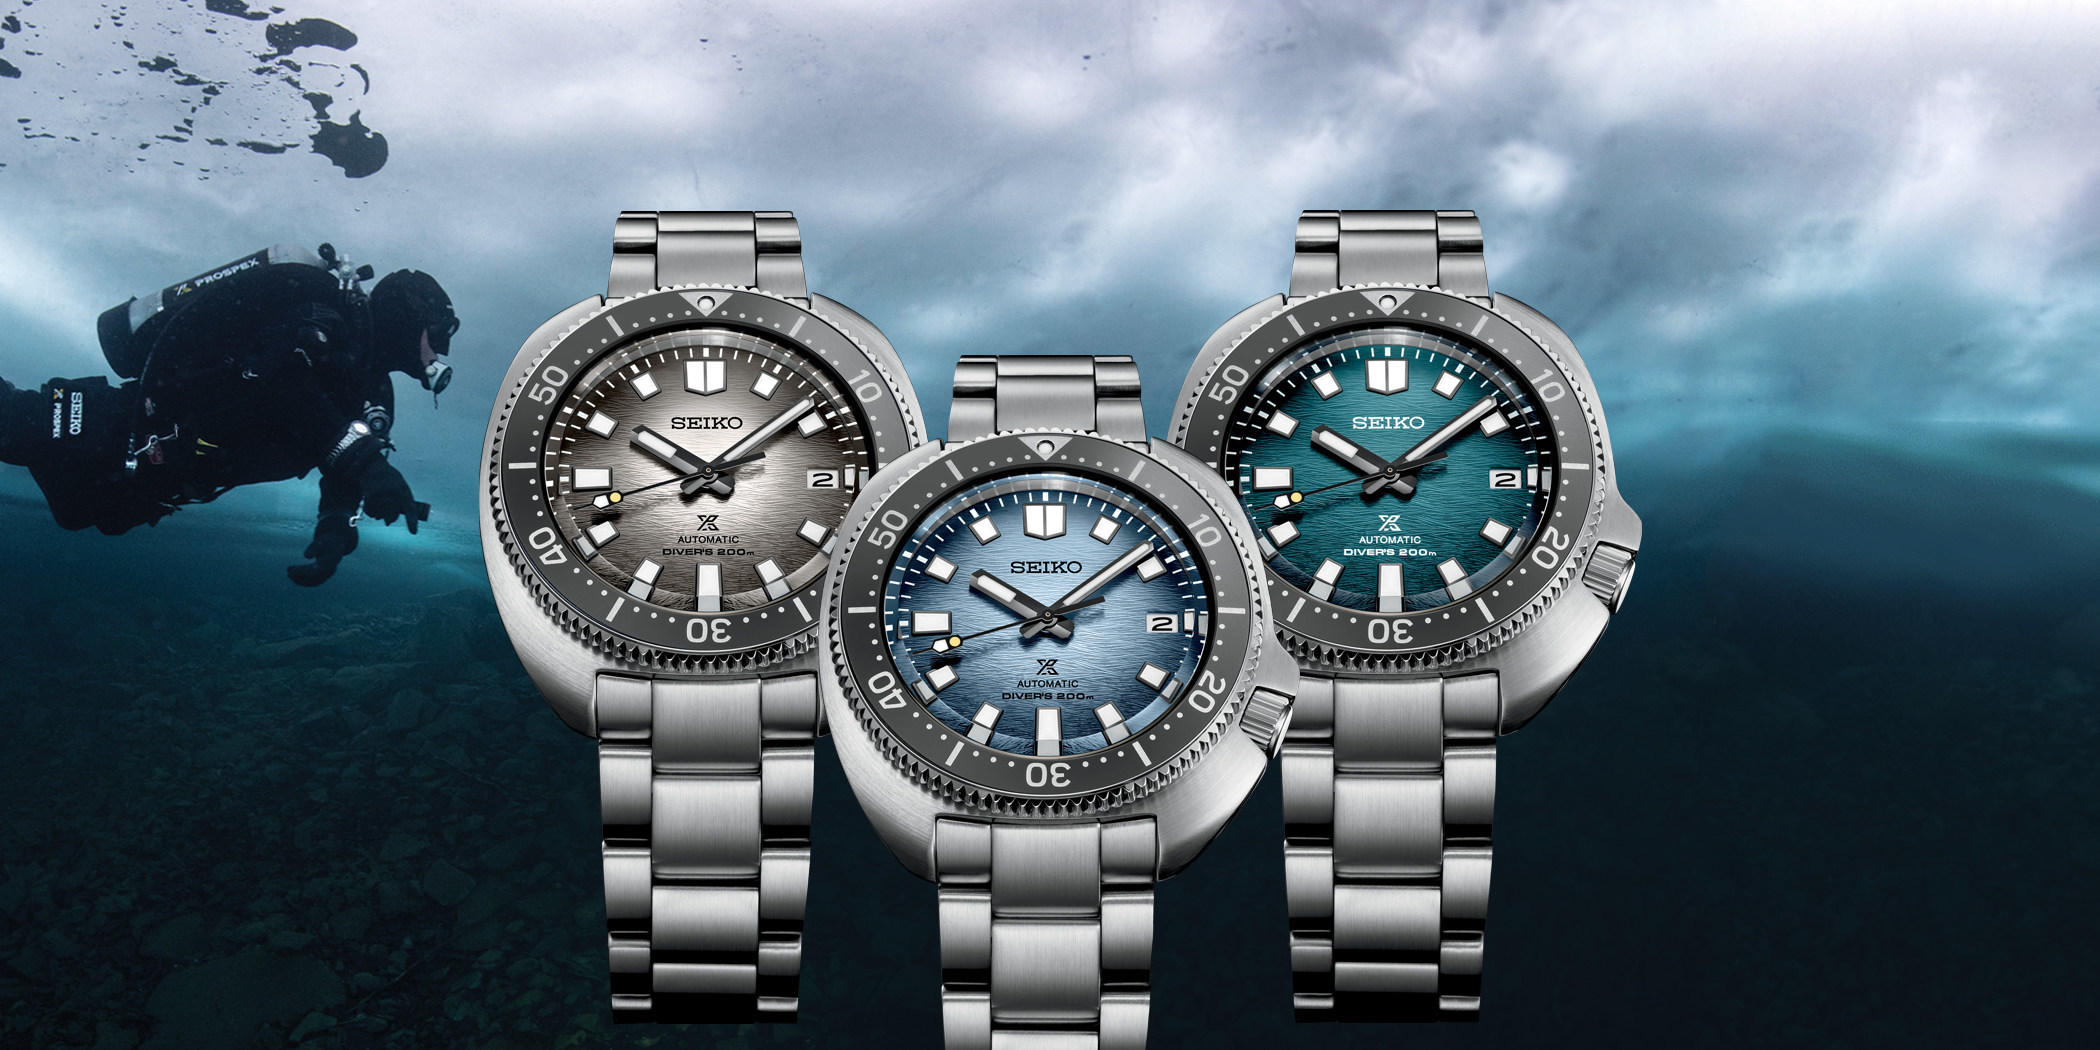 Built For The Ice Diver: New U.S. Special Edition Seiko Prospex Automatic Divers' Watches Inspired By Daring Explorers